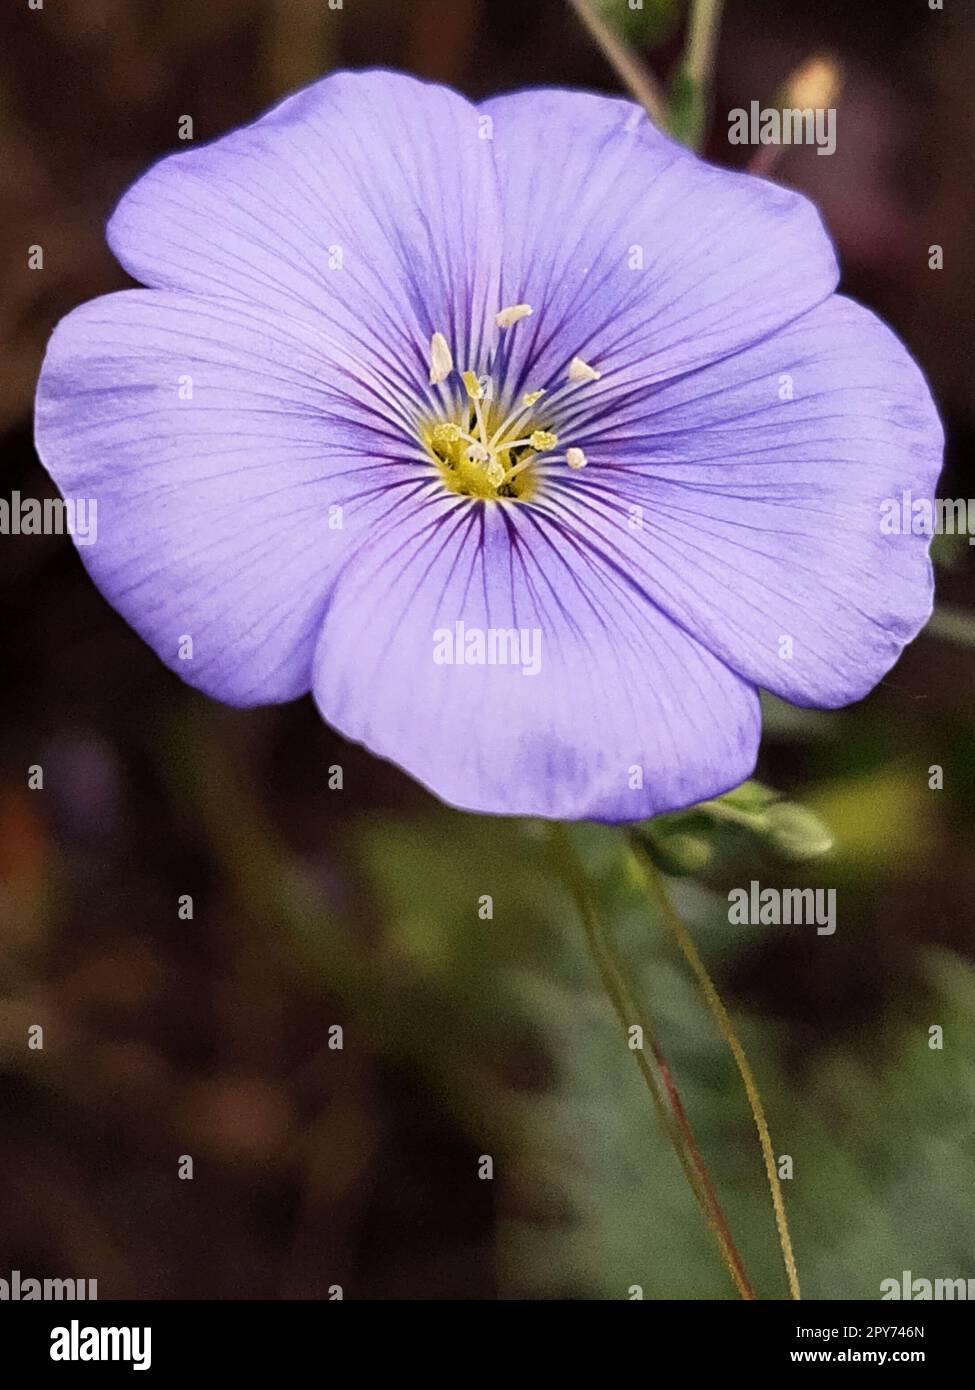 Flax flower close up Stock Photo